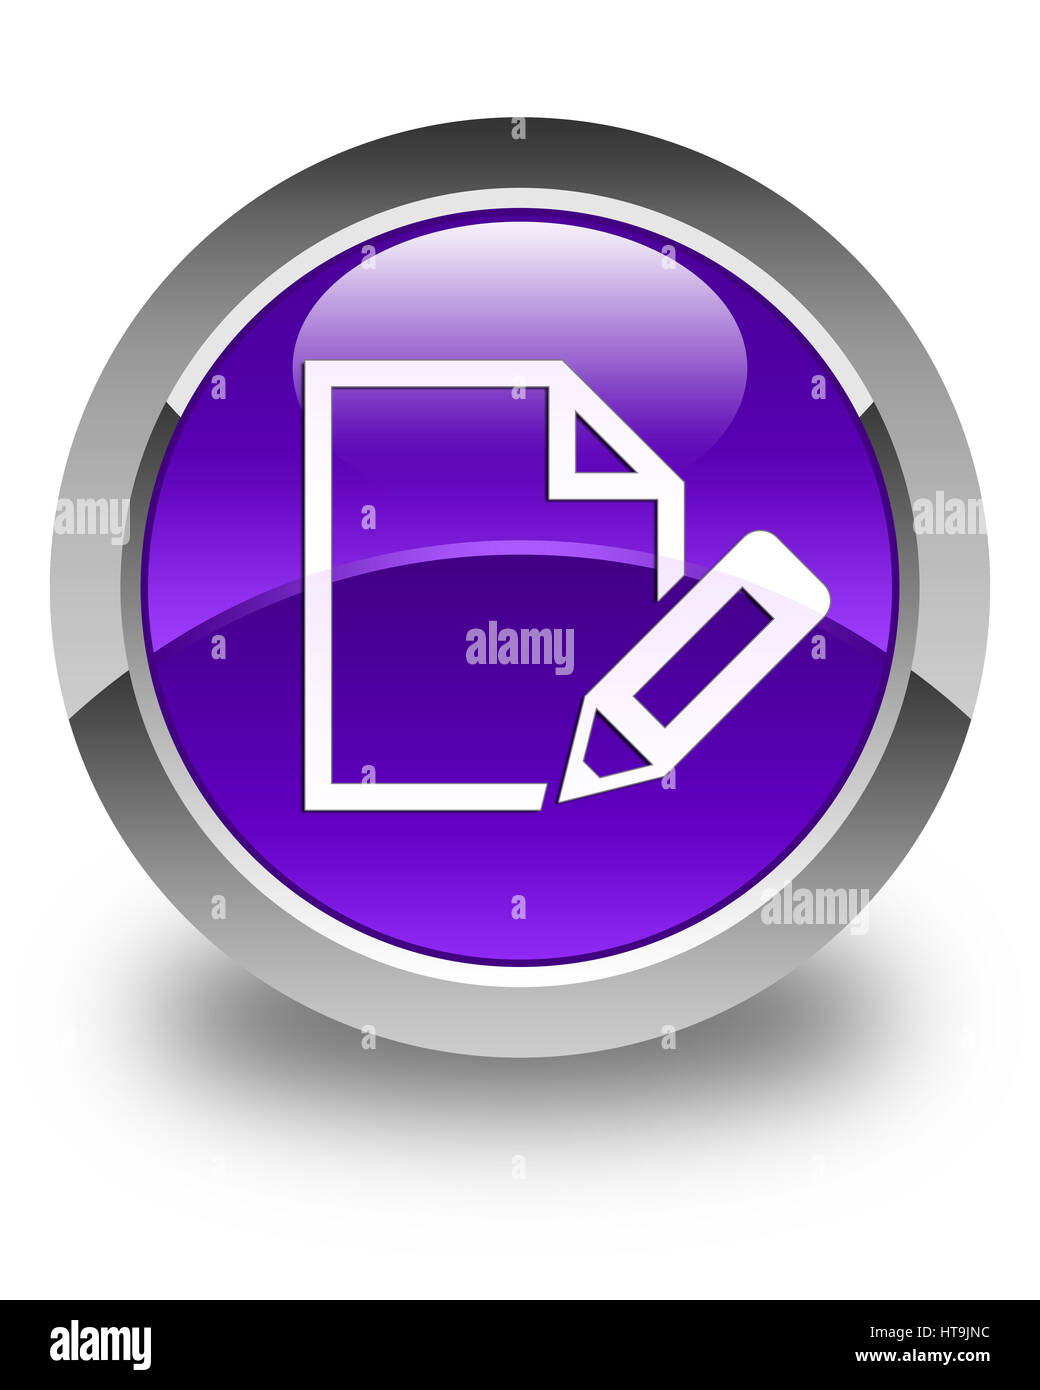 Edit document icon isolated on glossy purple round button abstract illustration Stock Photo